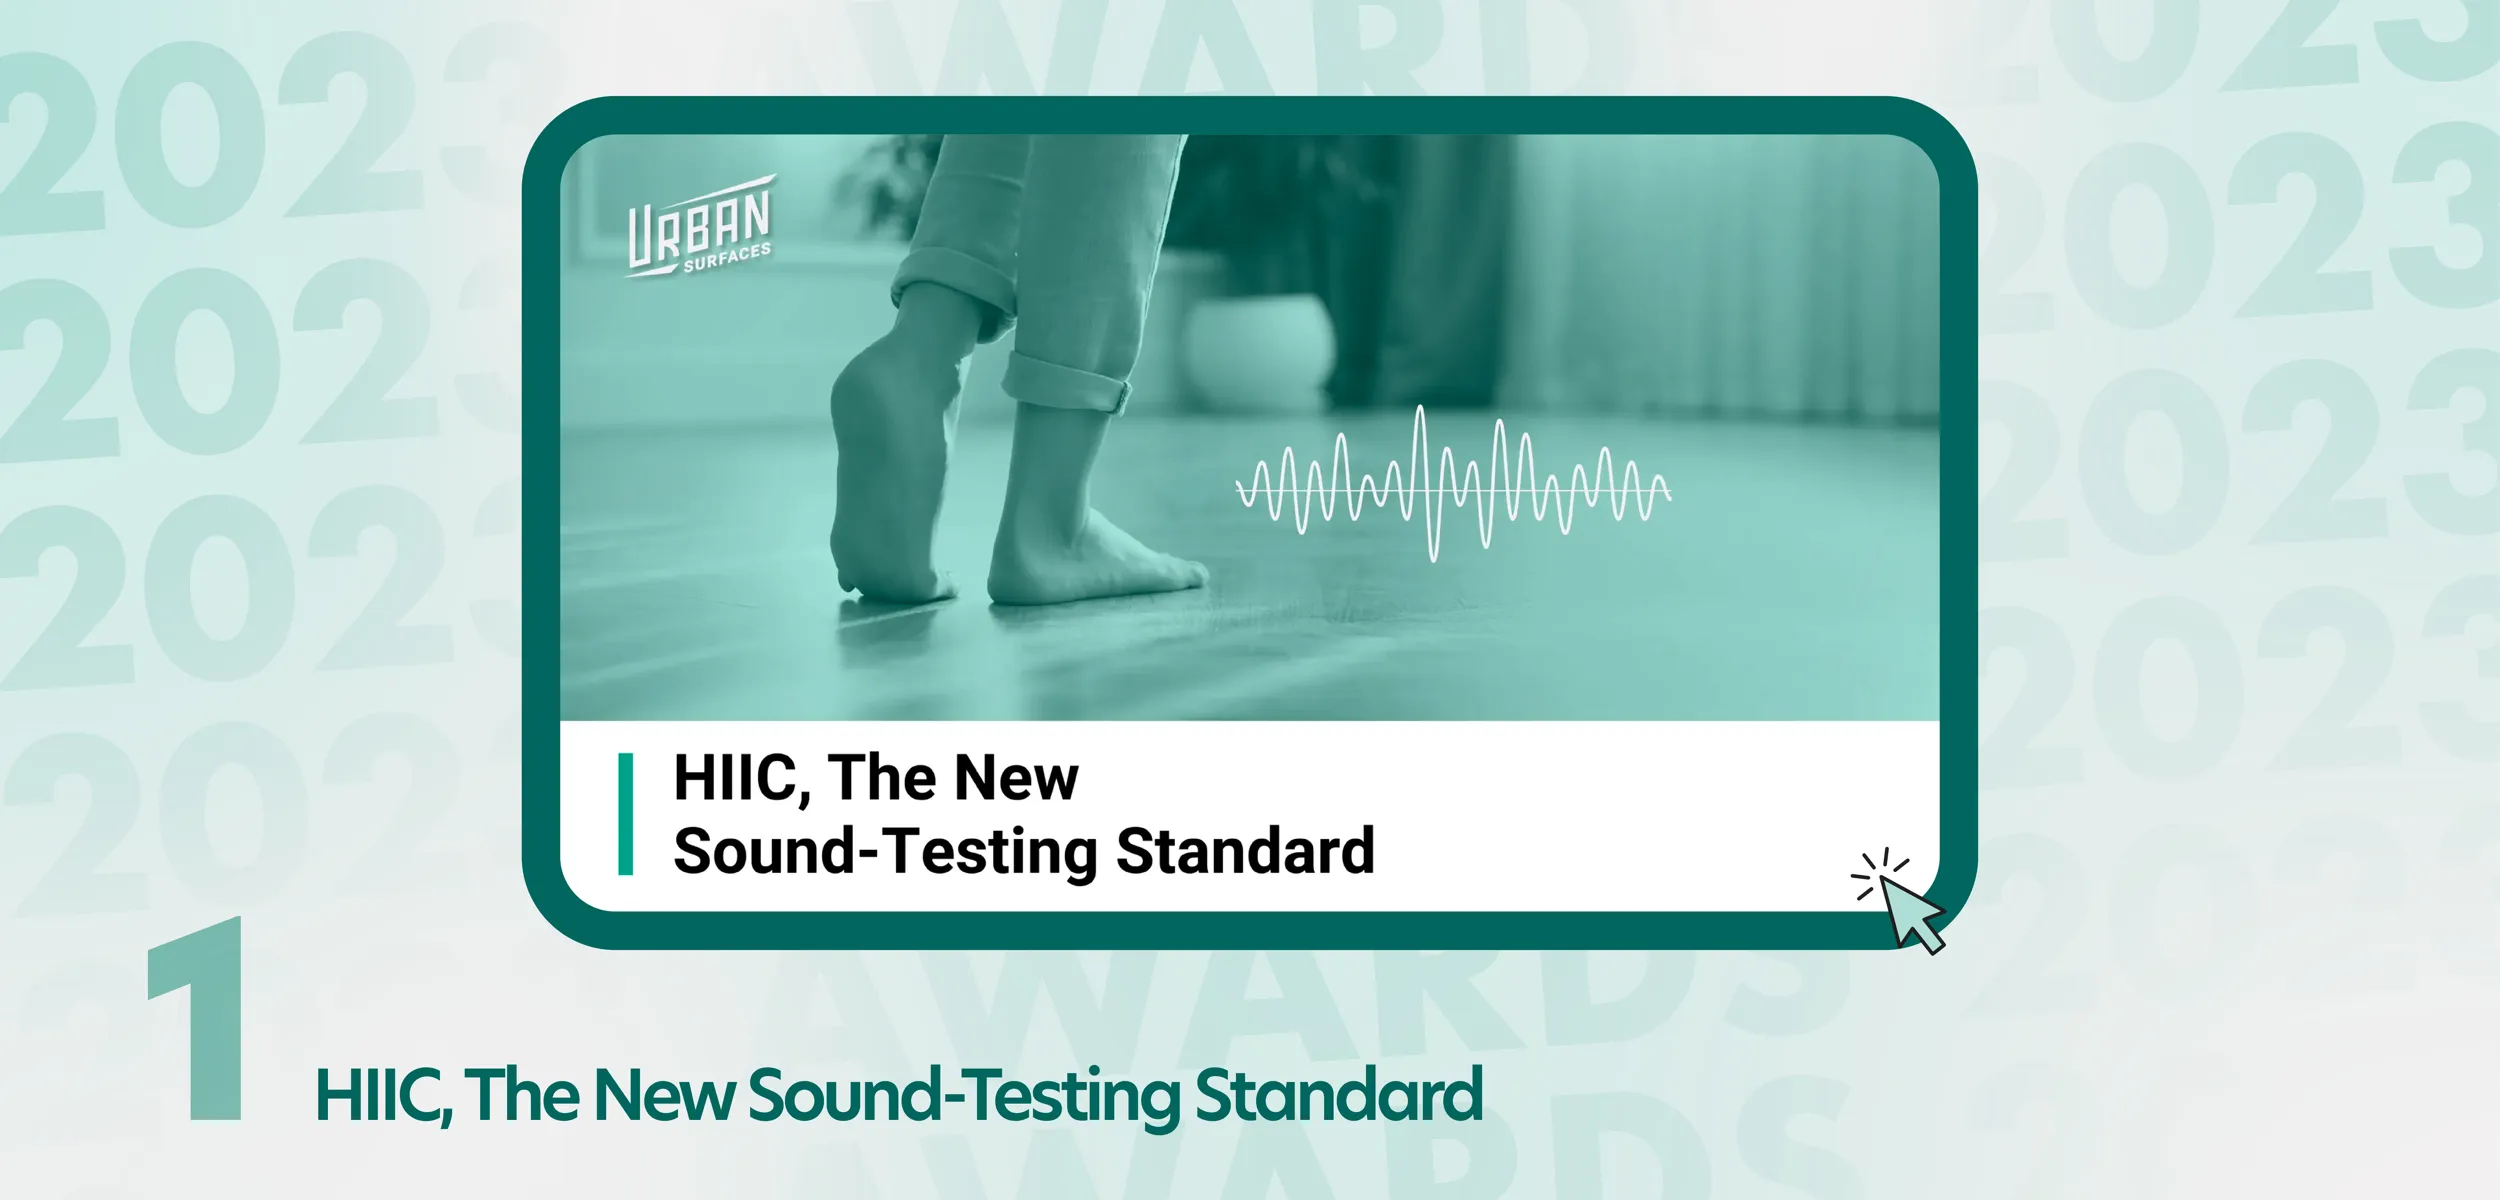 Child walking on vinyl flooring with a diagram of sound waves to illustrate sound testing and mitigation. Title: HIIC, The New Sound-Testing Standard.